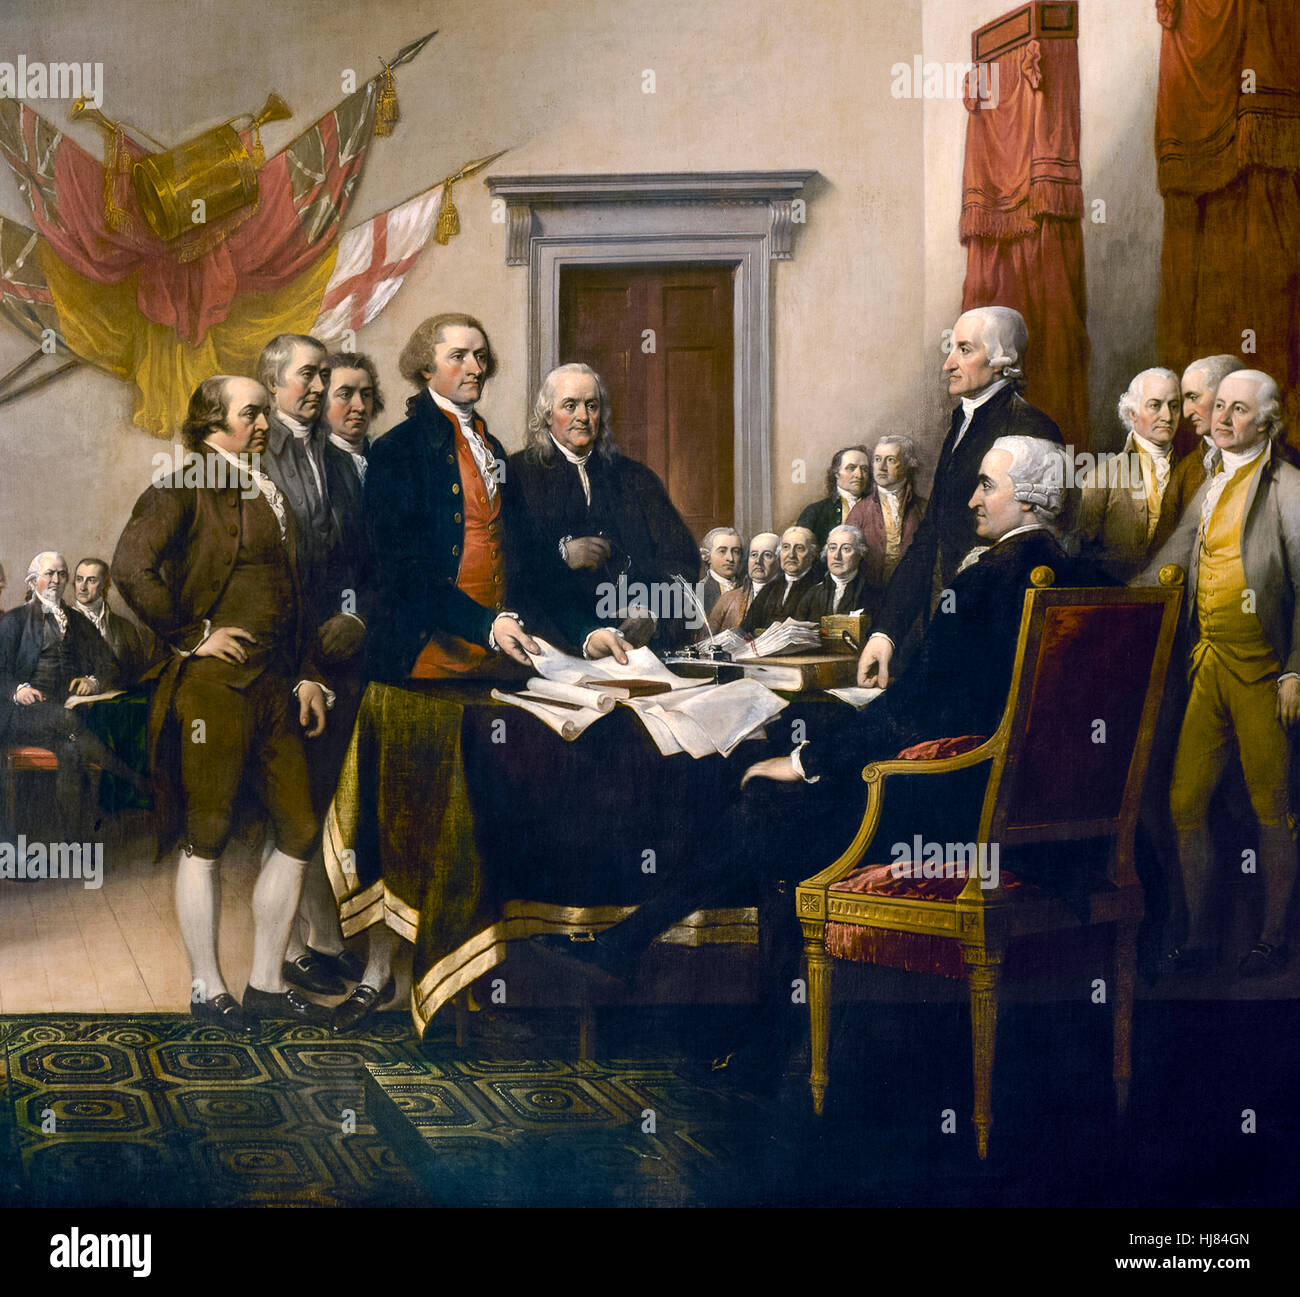 The Committee of Five of the Second Continental Congress (from left to right John Adams, Roger Sherman, Robert R. Livingston, Thomas Jefferson and Benjamin Franklin) from ‘Declaration of Independence’, 1817 oil painting by John Trumbull (1756-1843). See description for more information. Stock Photo